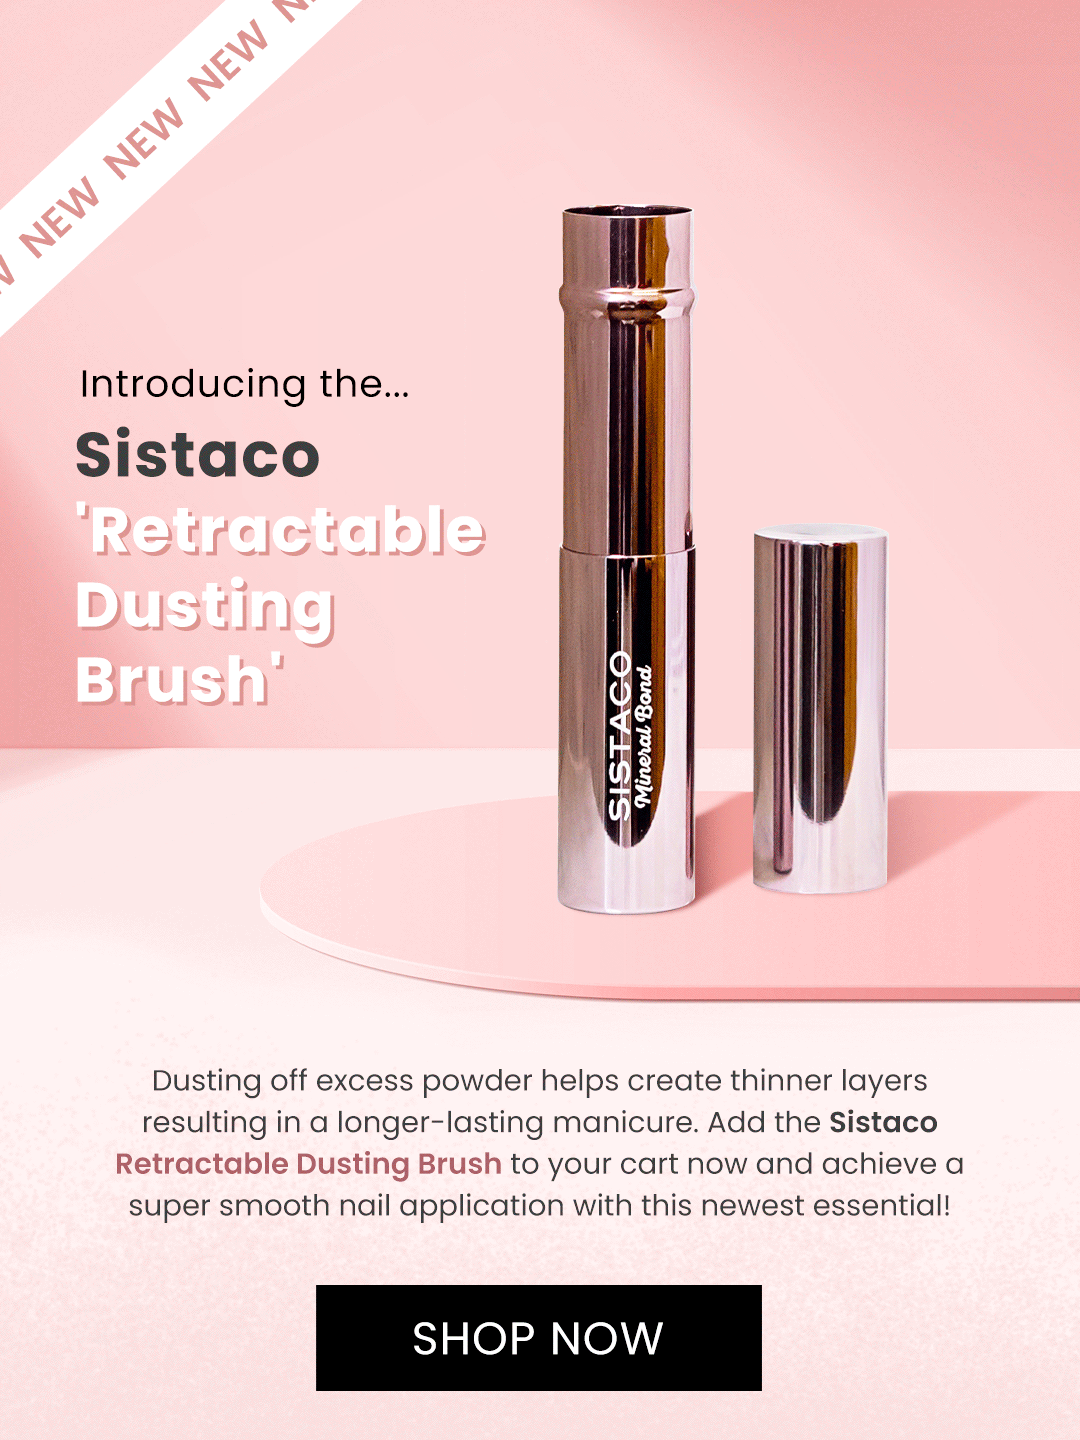 Introducing the... Sistaco Dusting off excess powder helps create thinner layers resulting in a longer-lasting manicure. Add the Sistaco Retractable Dusting Brush to your cart now and achieve a super smooth nail application with this newest essential! SHOP NOW 